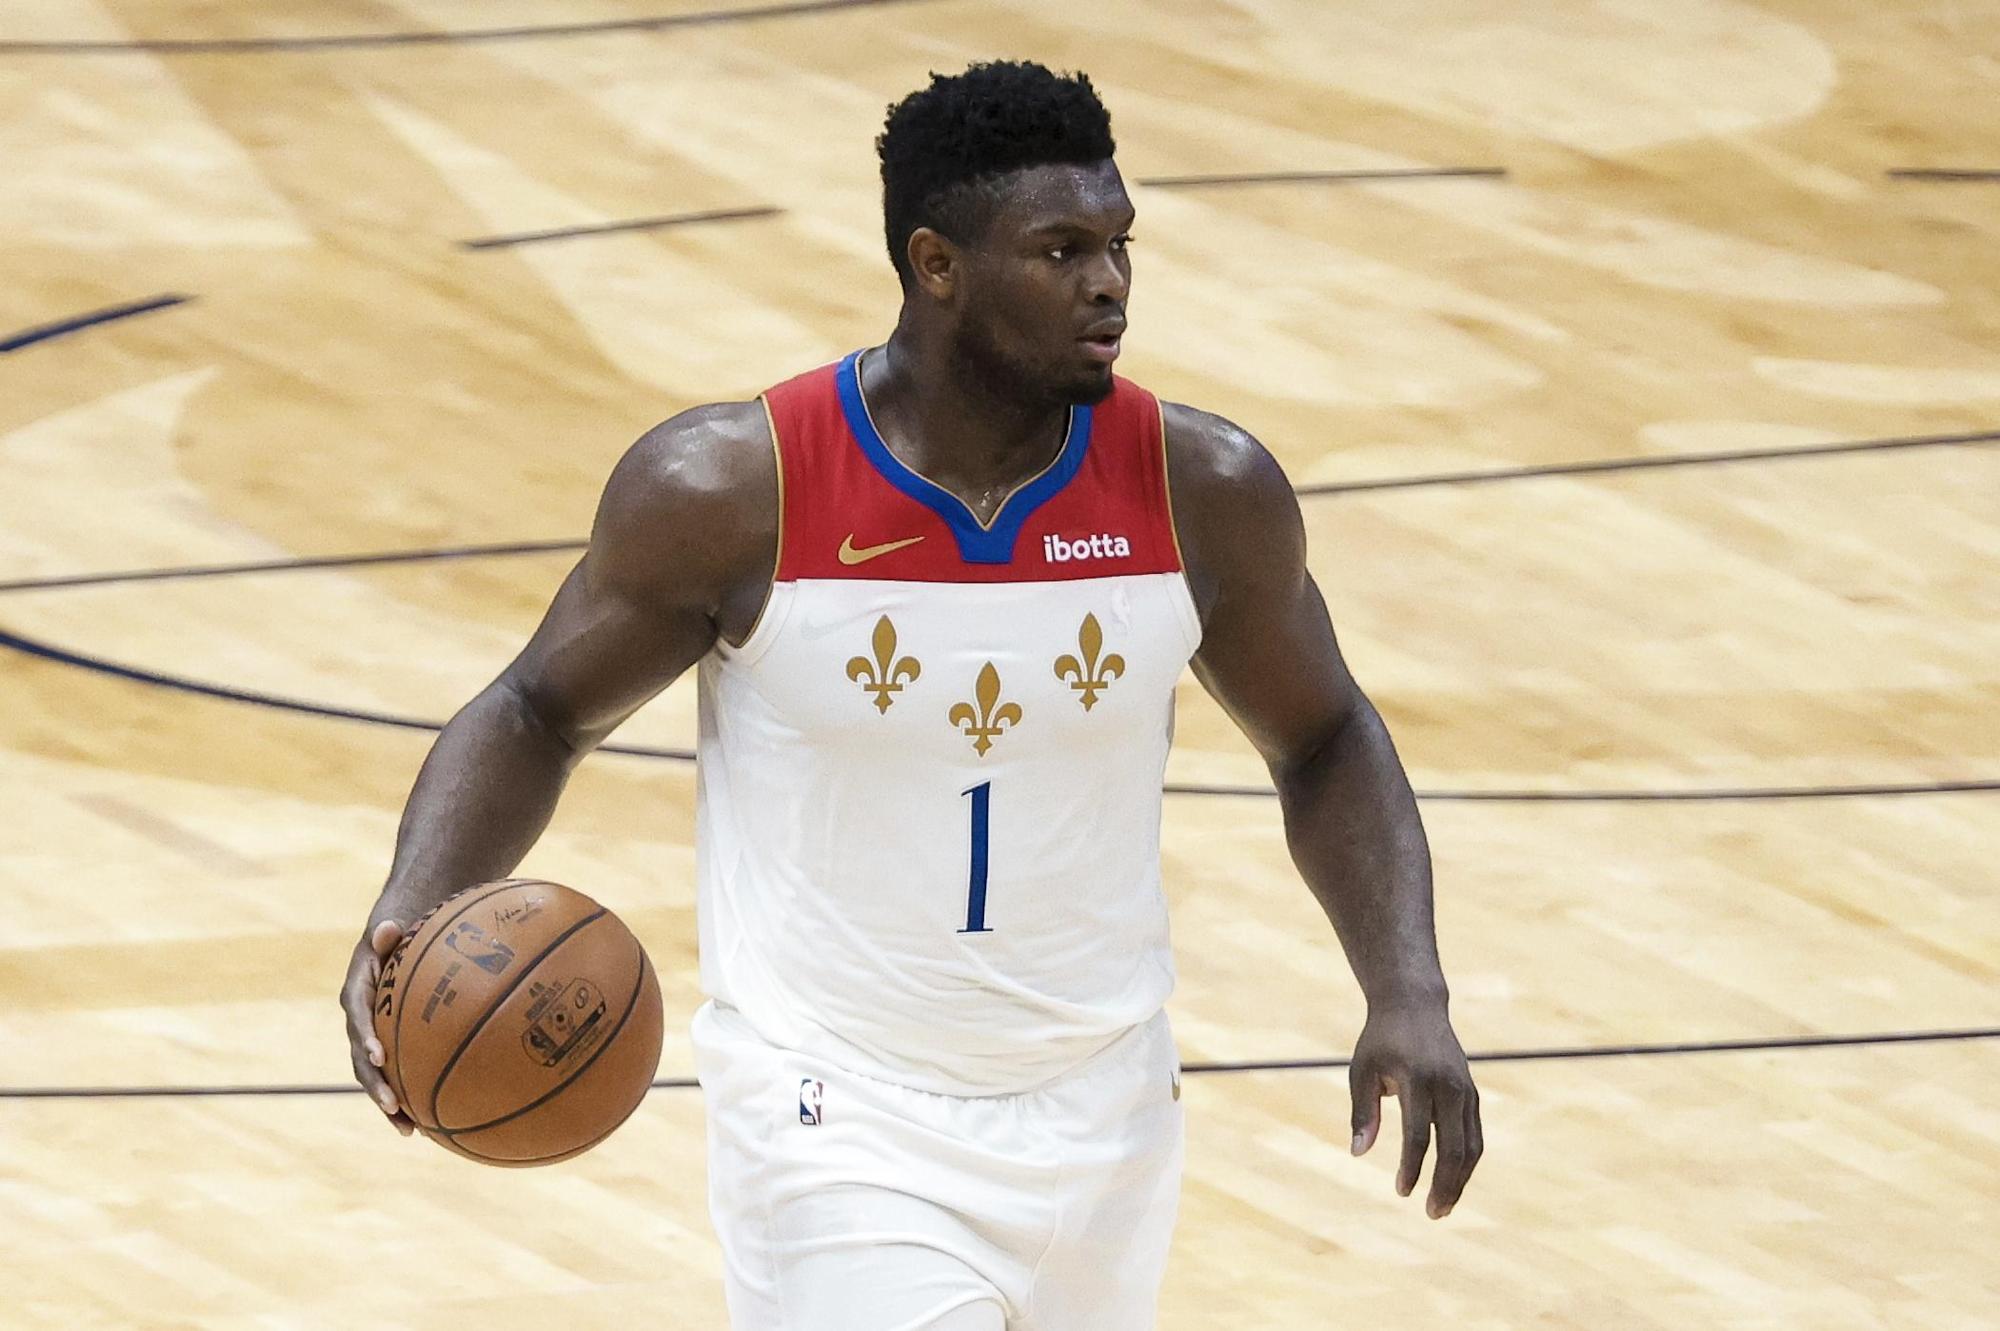 Zion Williamson Receives Injection To “Stimulate Bone Healing” And Will Be Out 4-6 Weeks